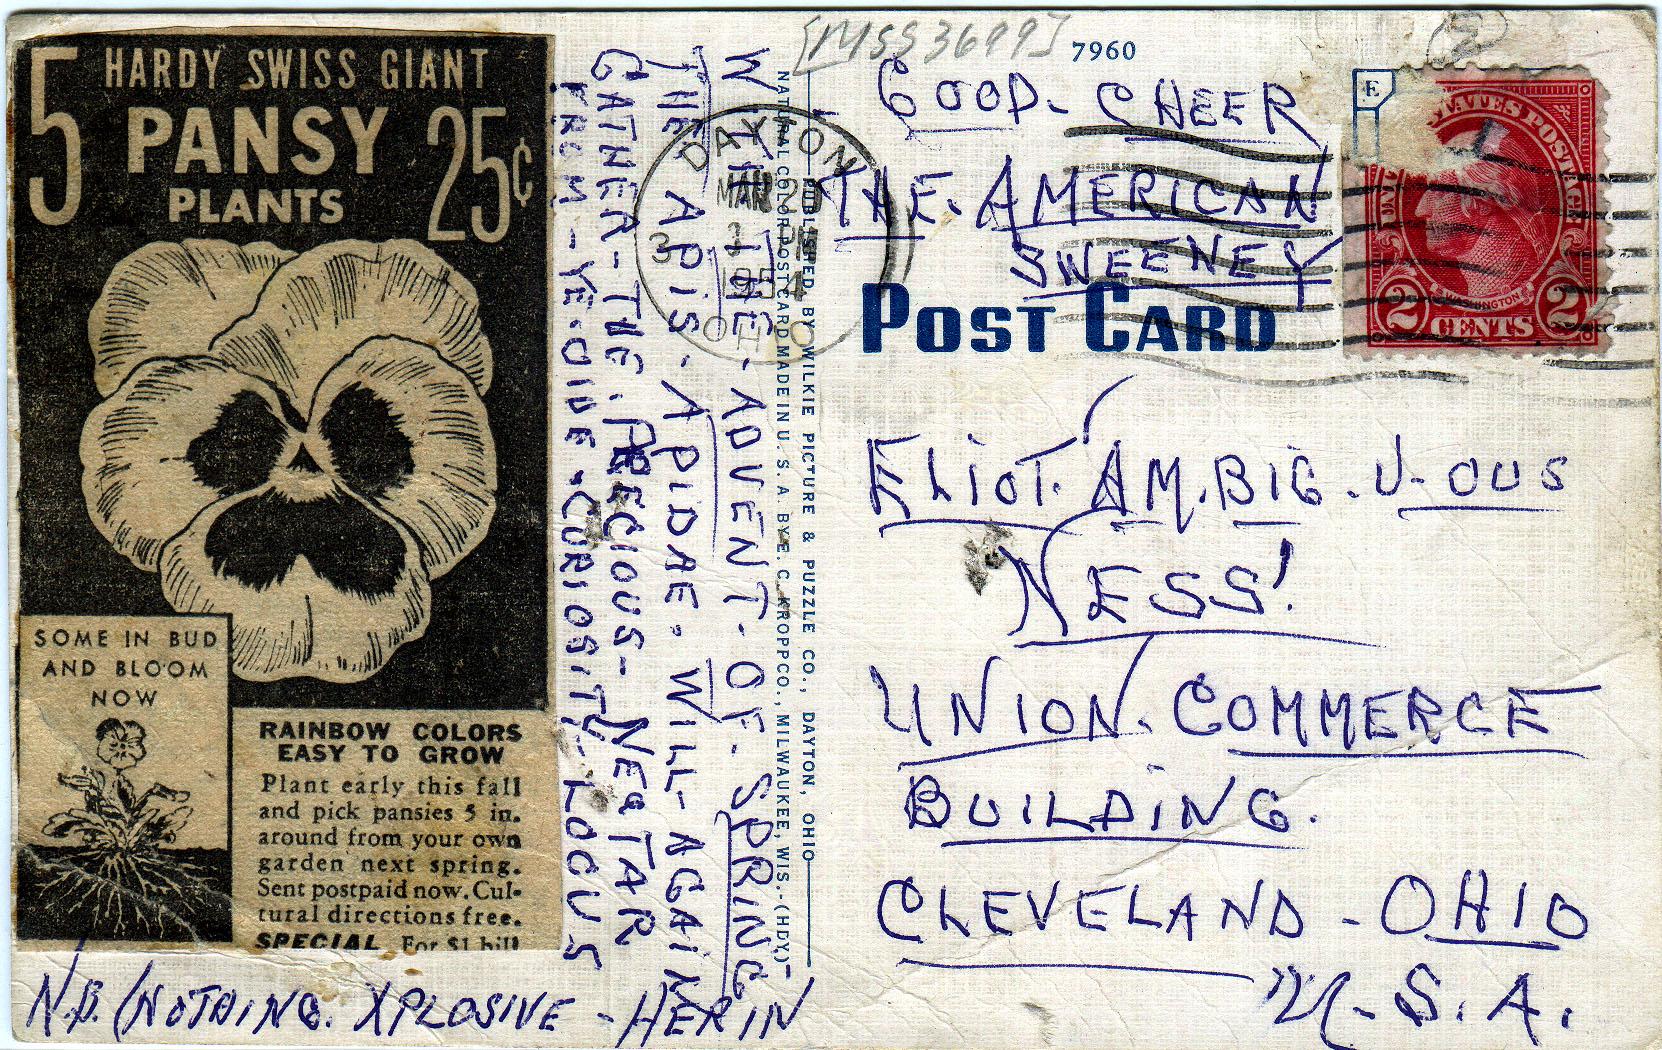 Postcard (1 of 5) sent to Elliot Ness in 1954 by an asylum inmate believed by some to be the Torso Murderer.